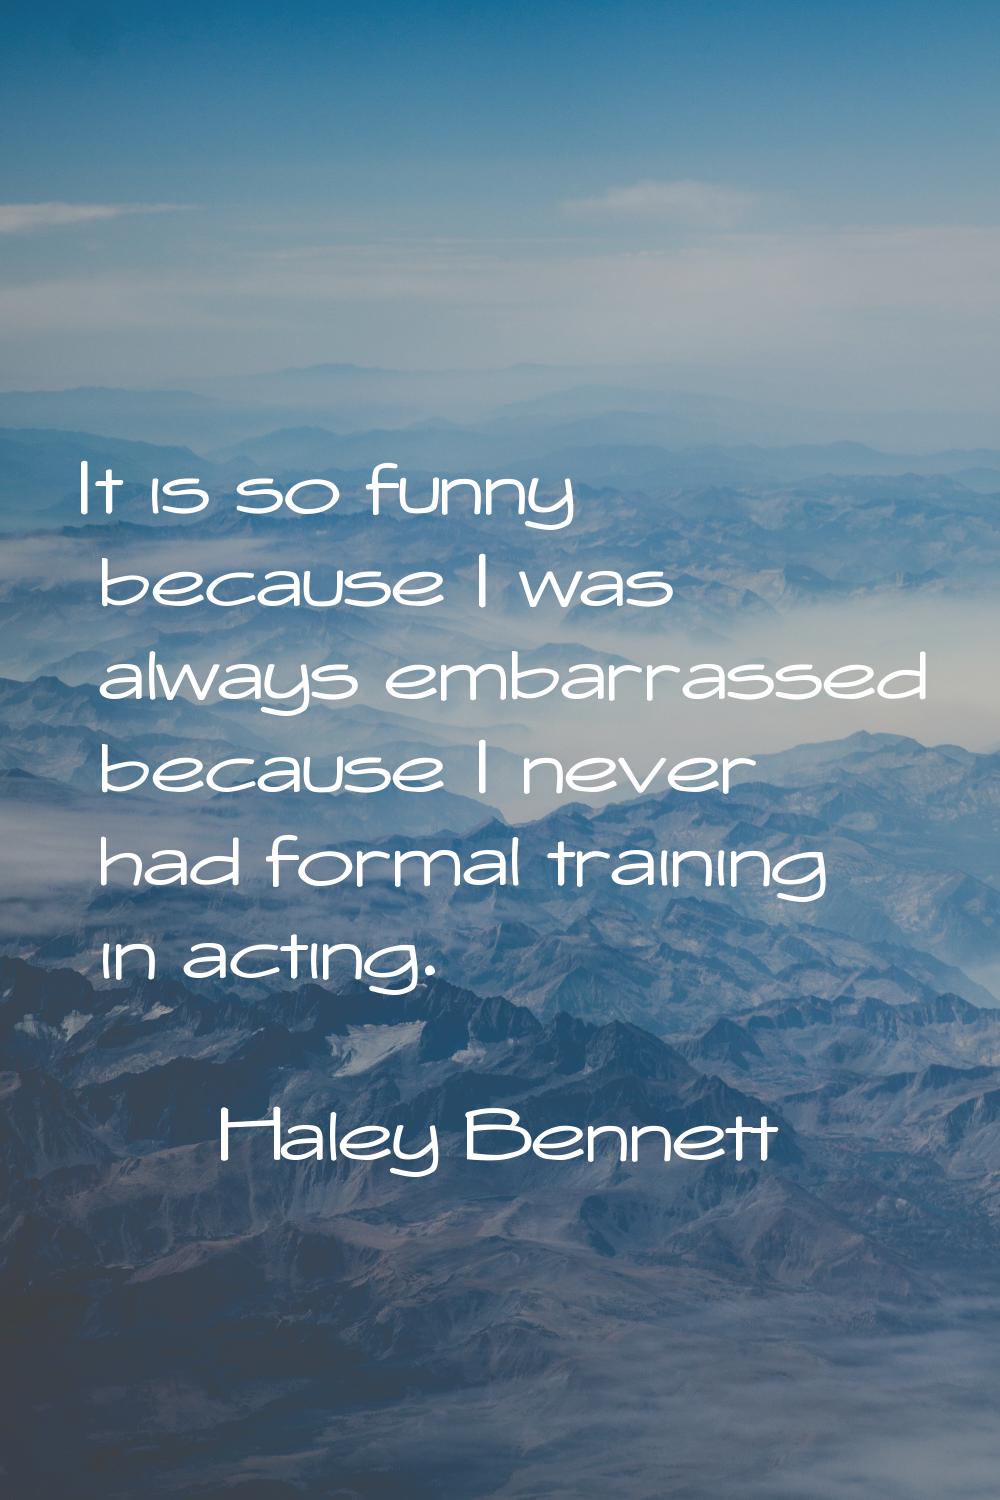 It is so funny because I was always embarrassed because I never had formal training in acting.